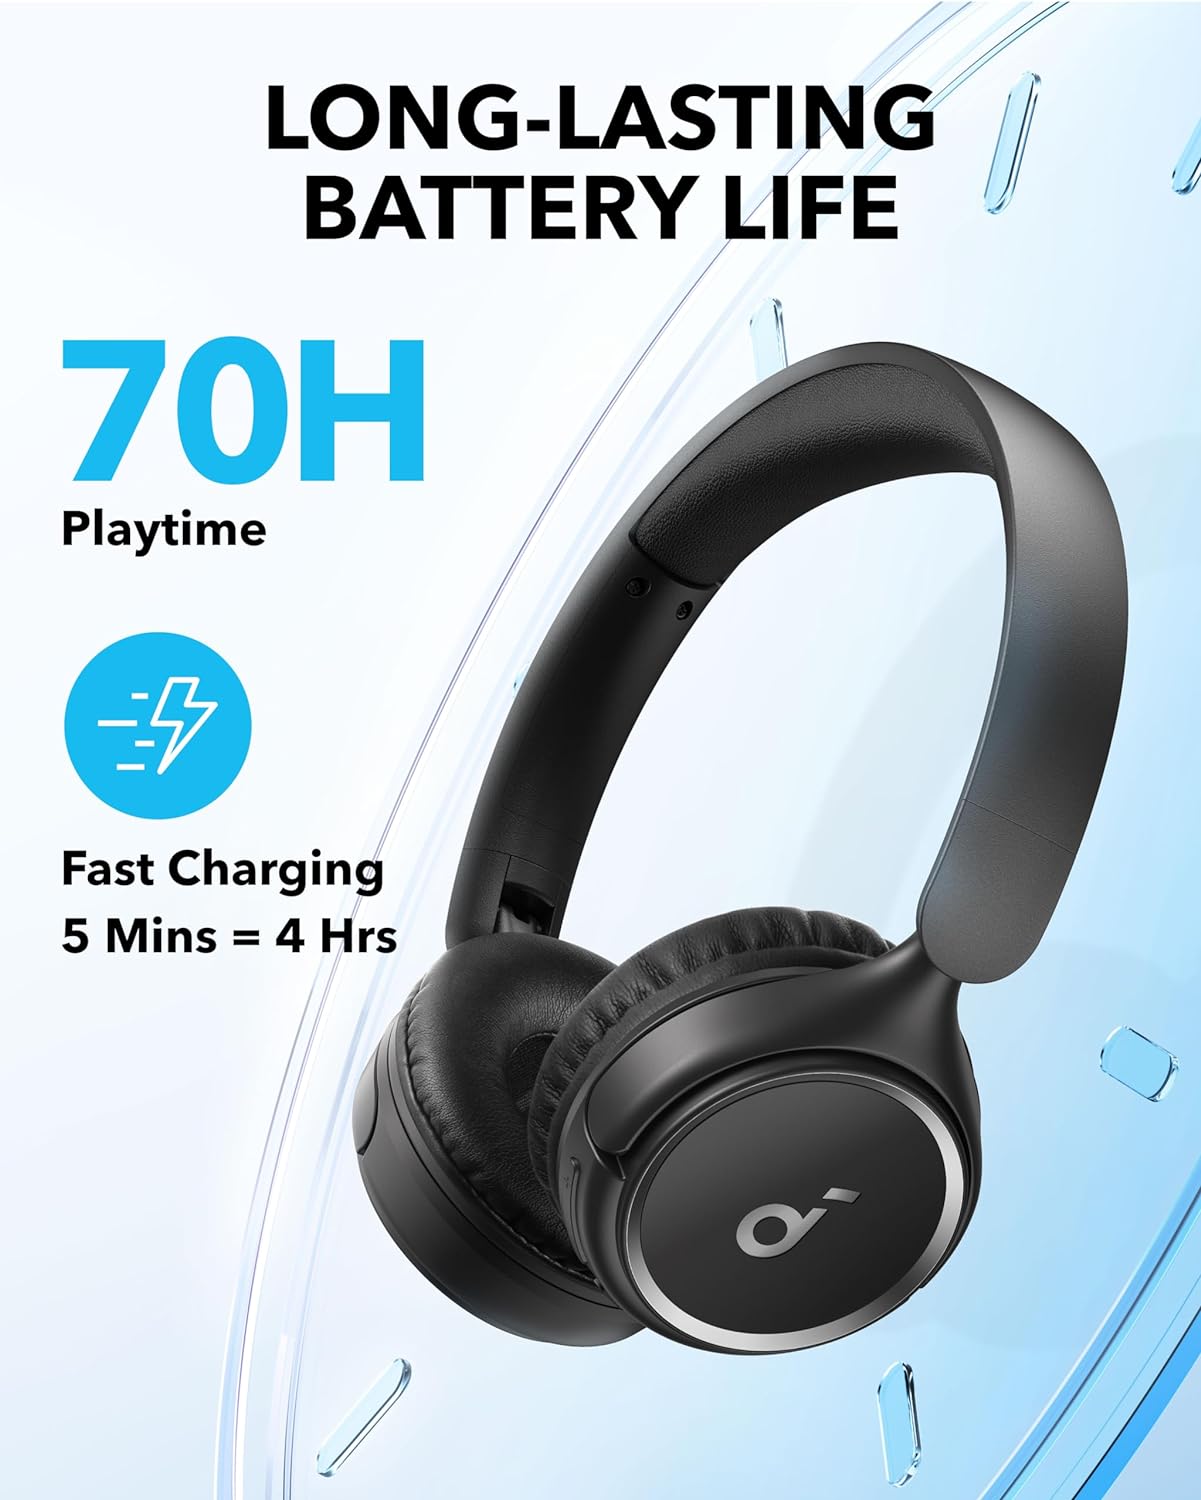 Anker Soundcore H30i Wireless On-Ear Headphones, Foldable Design, Pure Bass, 70H Playtime